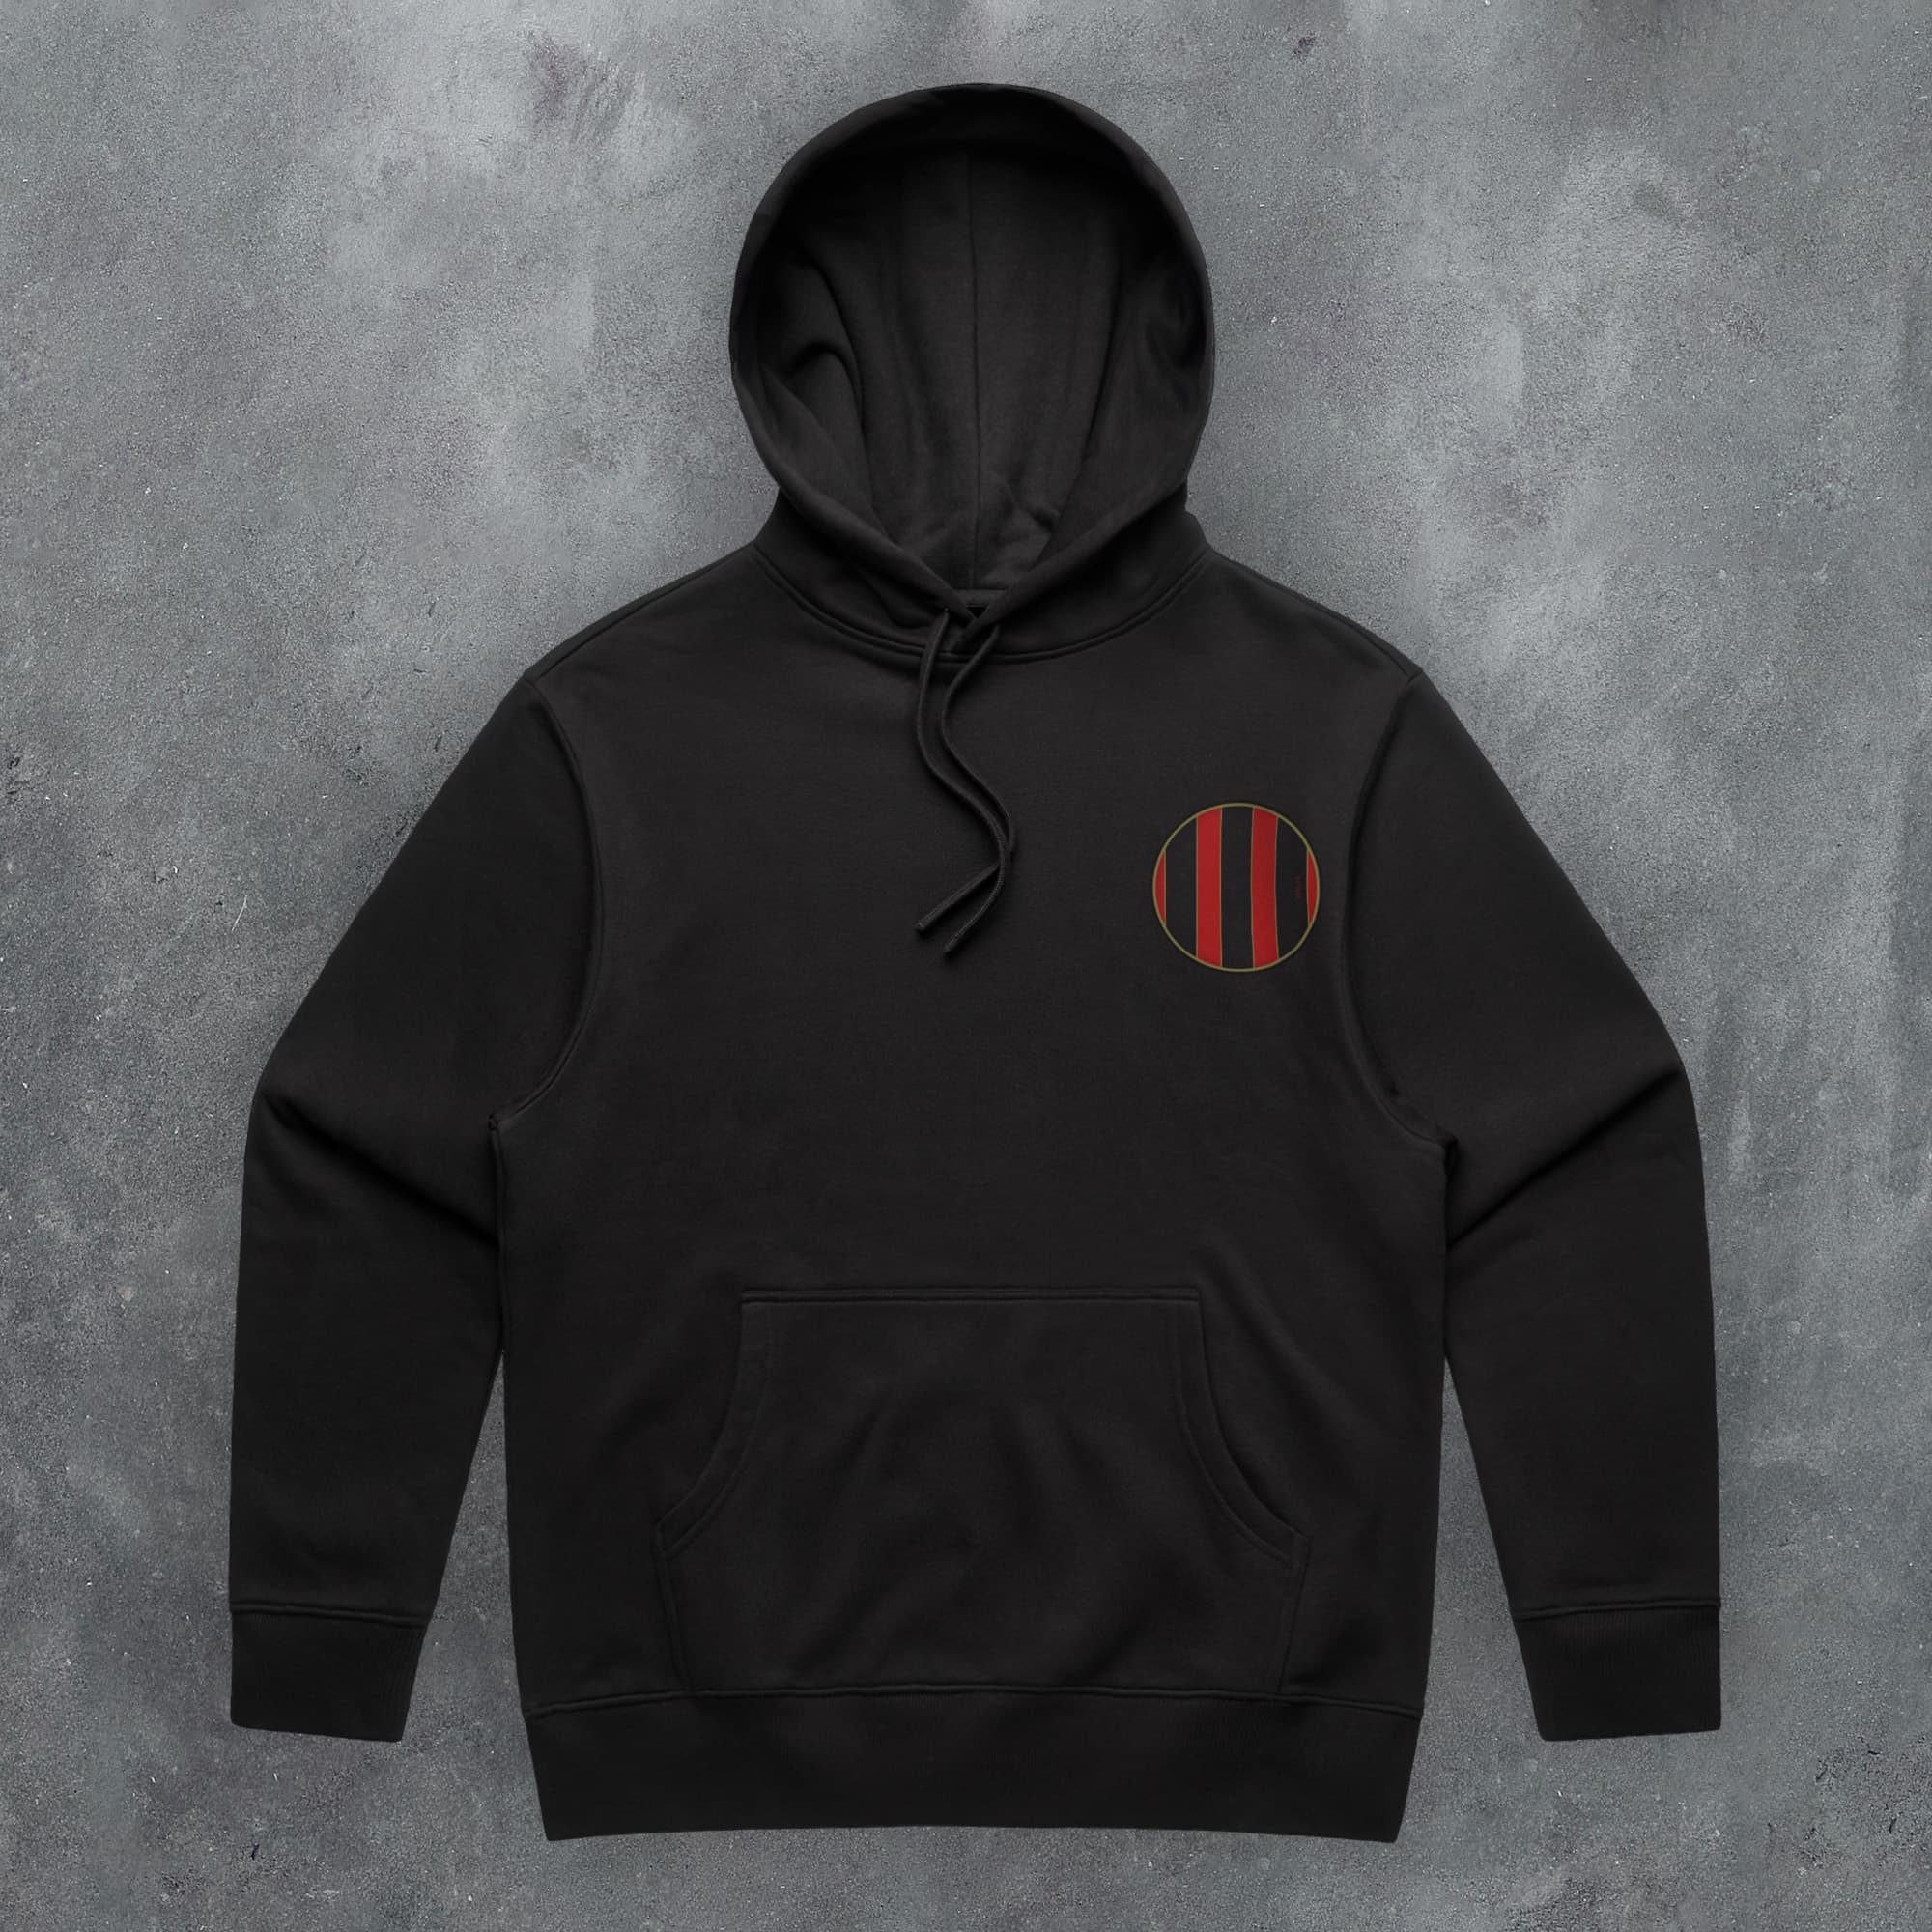 a black hoodie with a red and yellow stripe on it